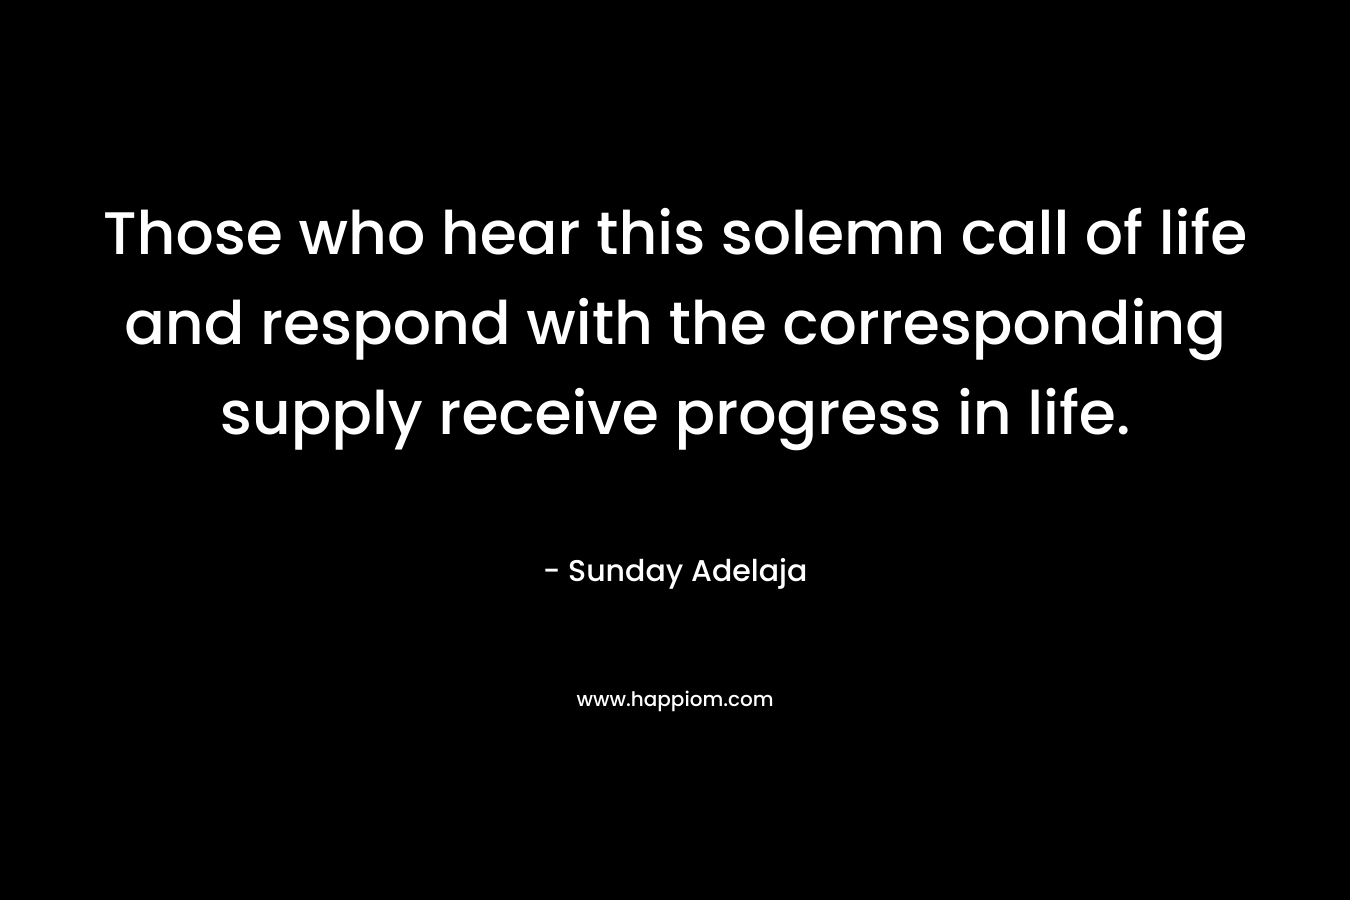 Those who hear this solemn call of life and respond with the corresponding supply receive progress in life.